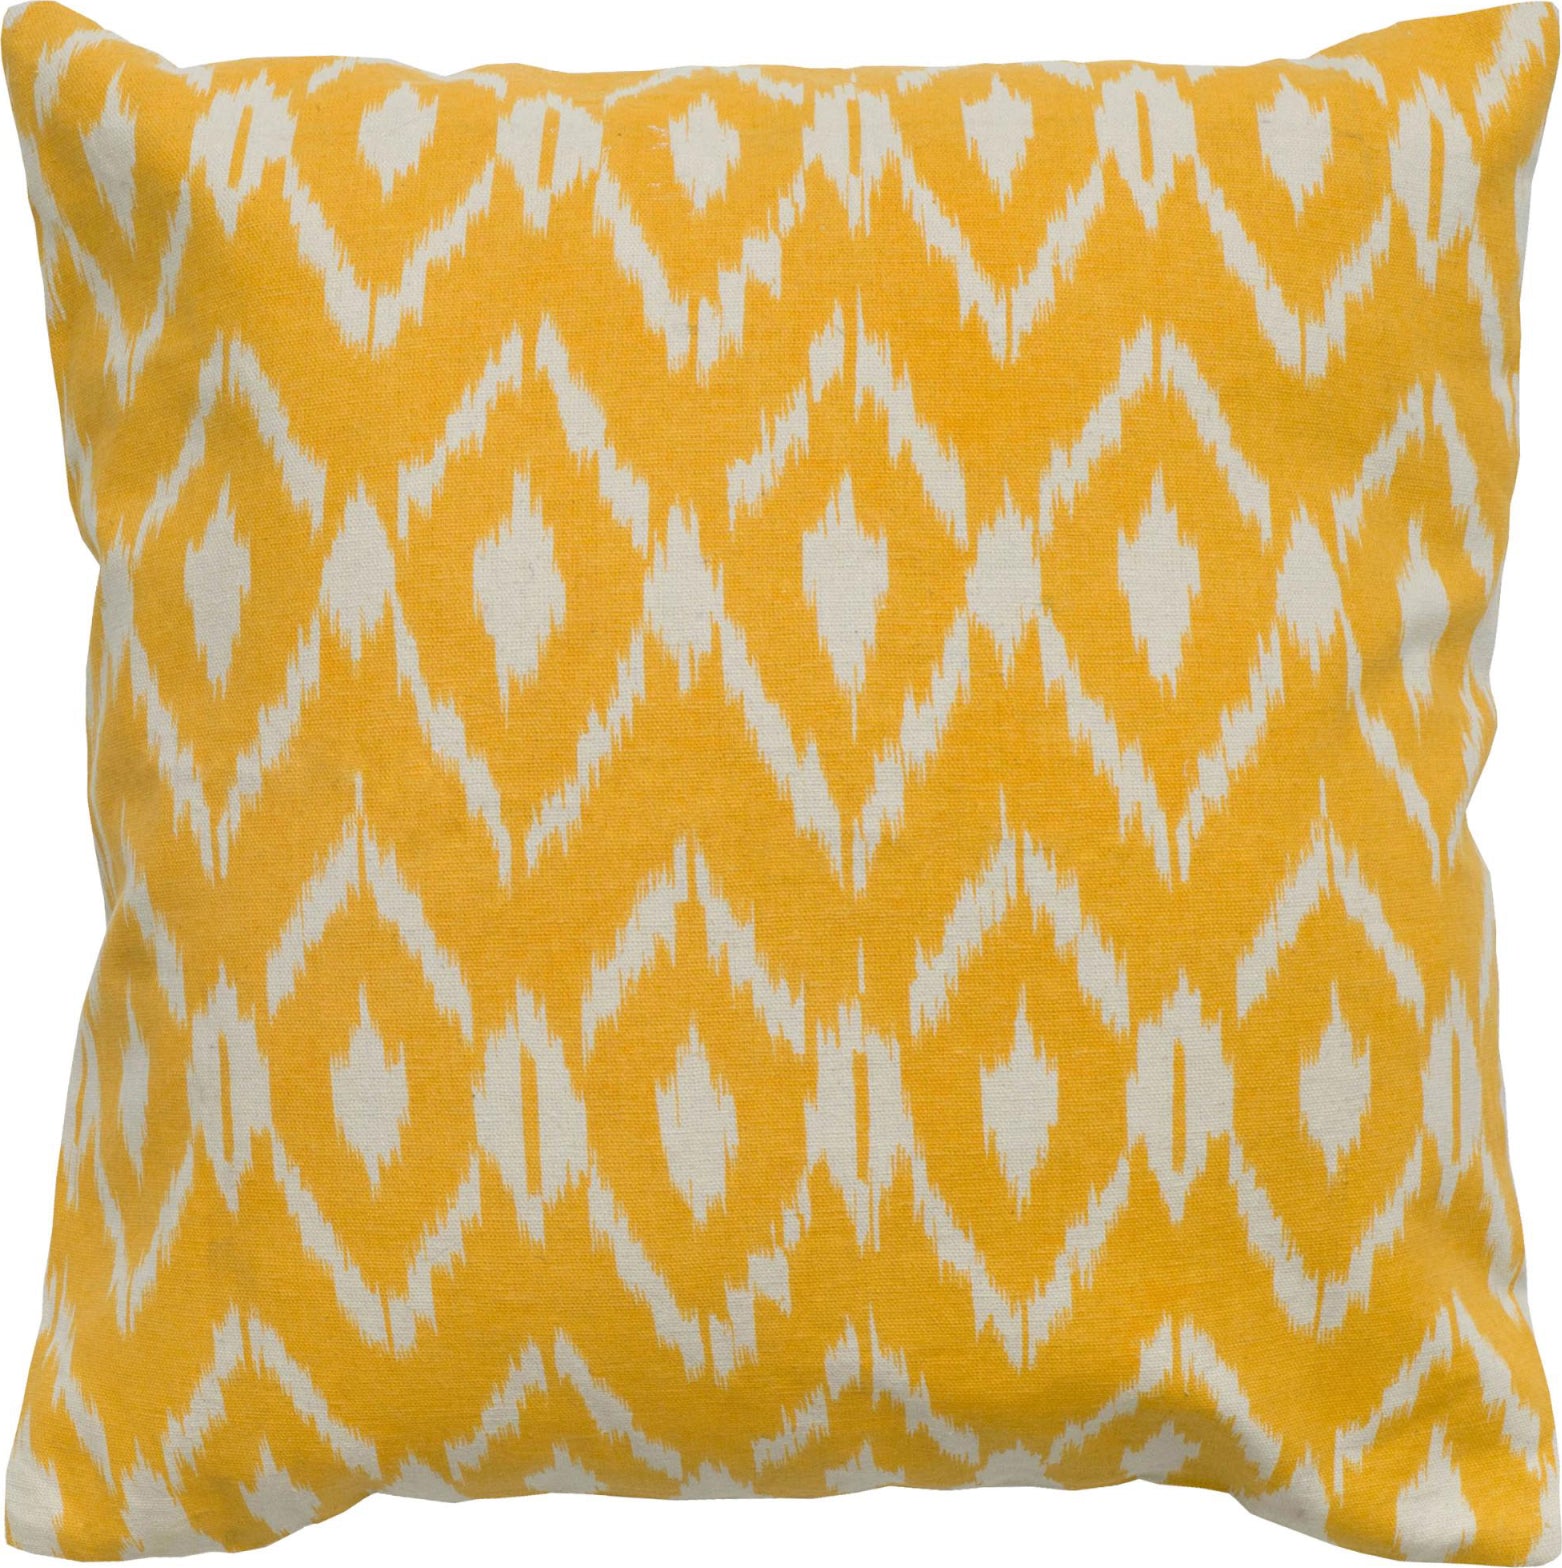 Rizzy Pillows T05012 Yellow